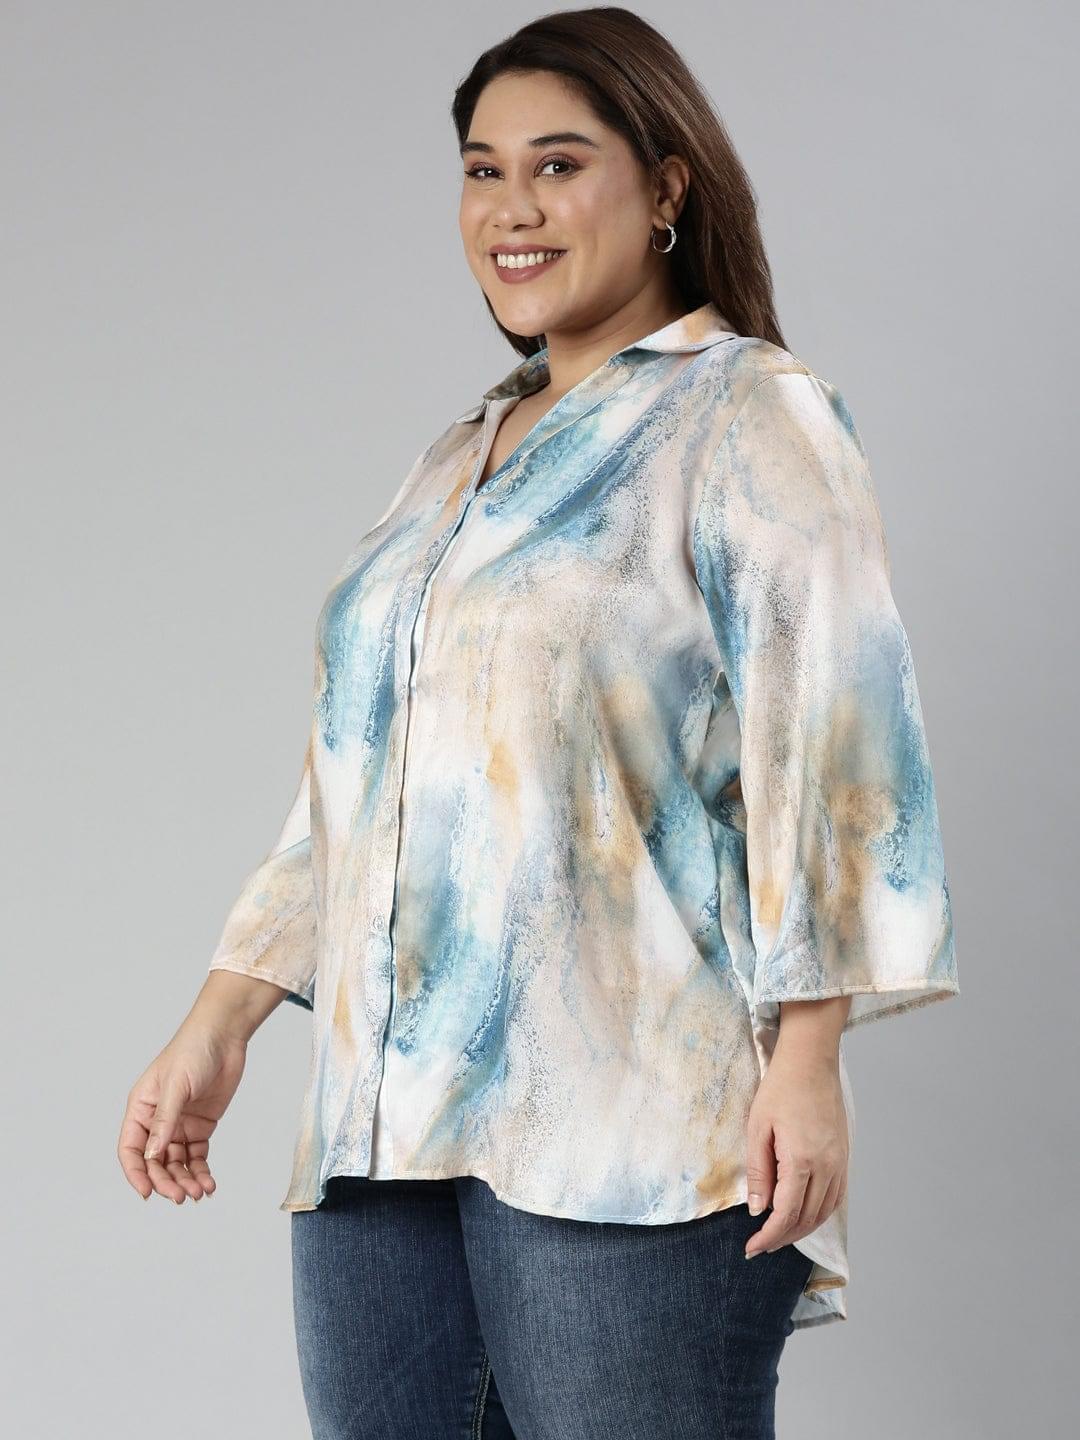 Multicolored satin shirt with a blend of rich hues, offering a touch of elegance and style. Perfect wardrobe essential for a trendy and vibrant look on any occasion.